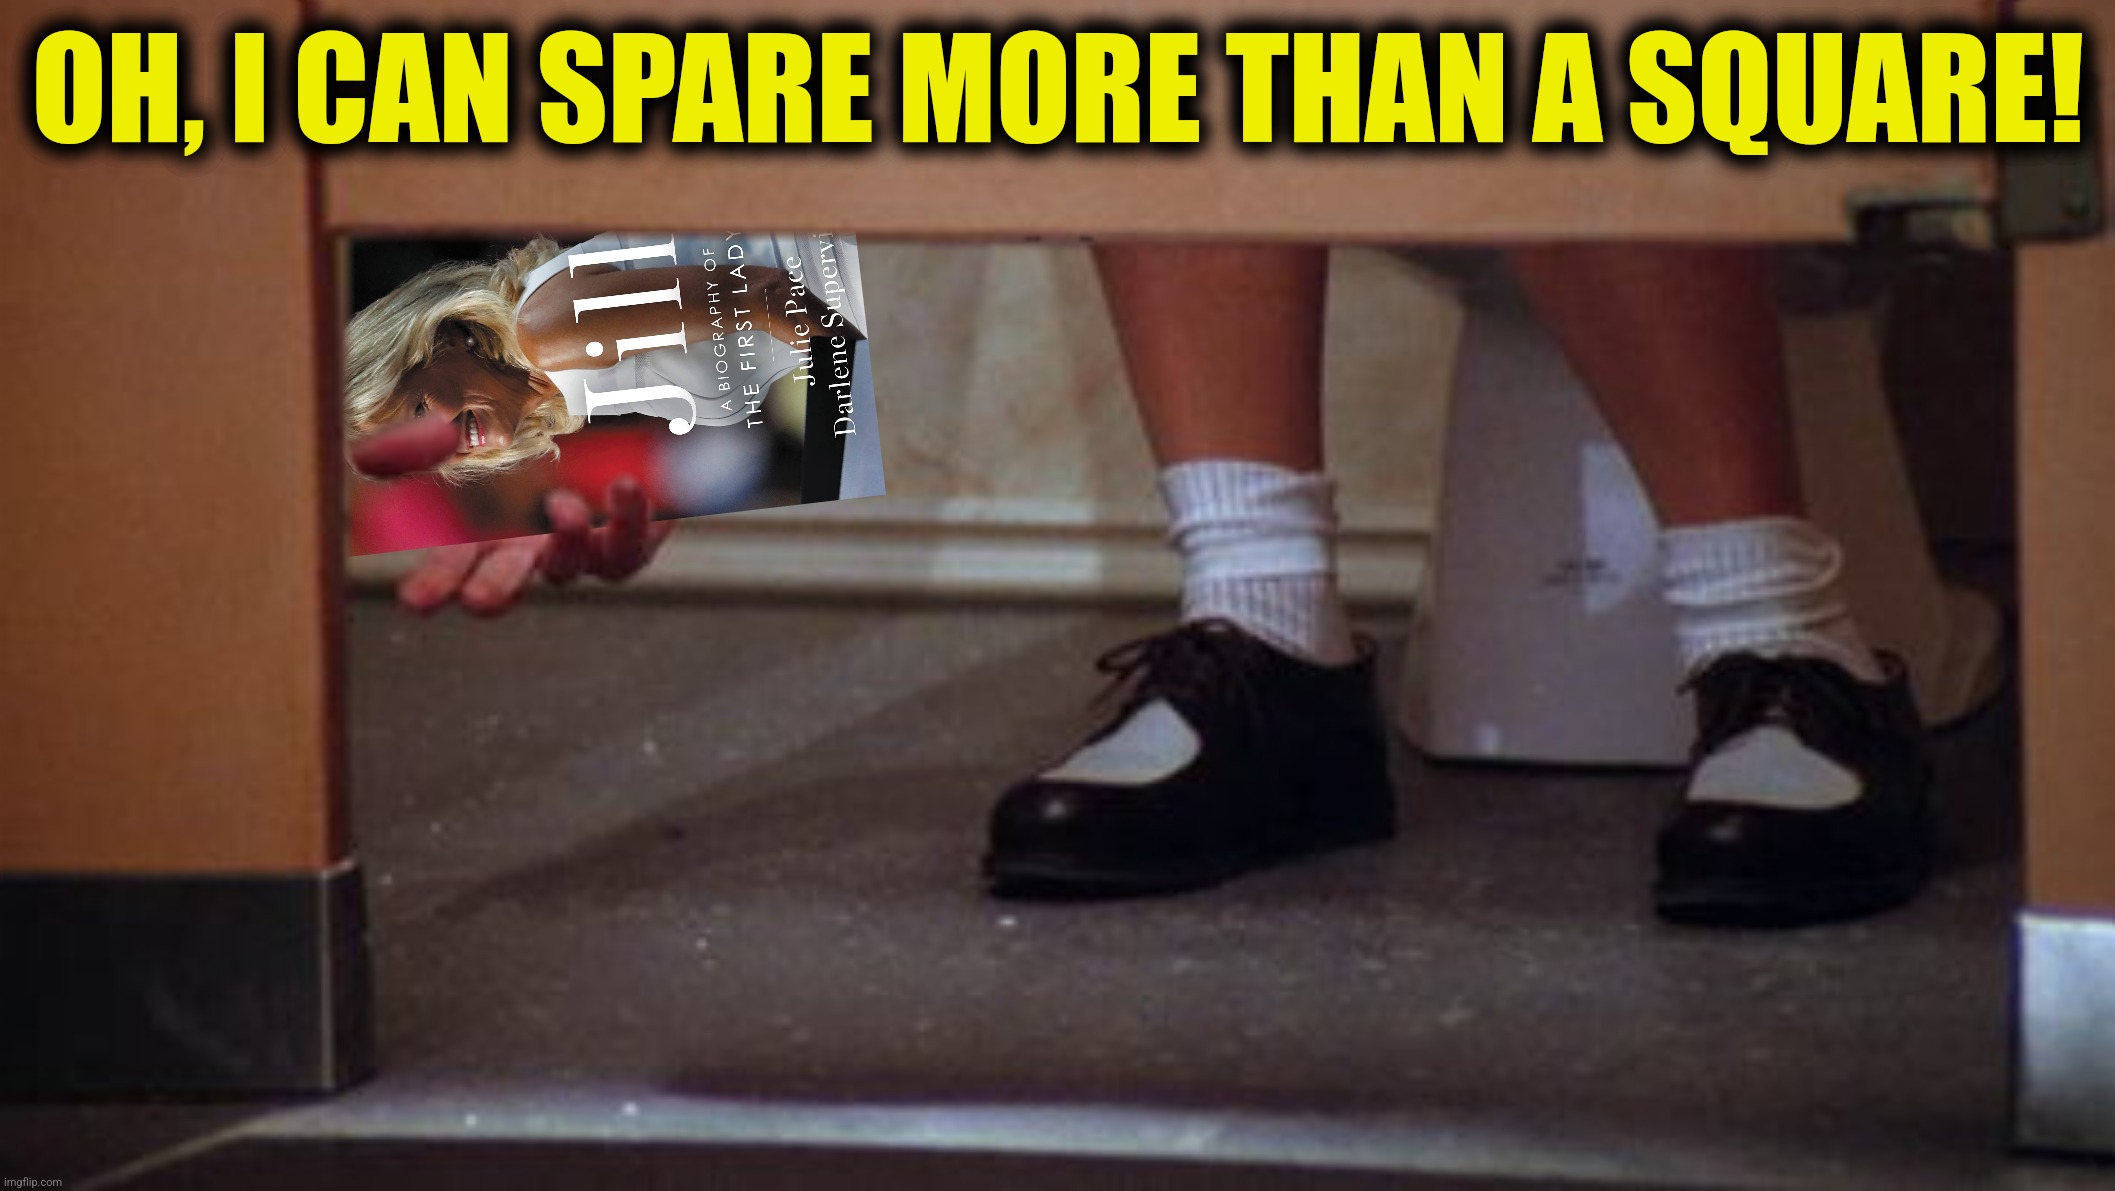 OH, I CAN SPARE MORE THAN A SQUARE! | made w/ Imgflip meme maker